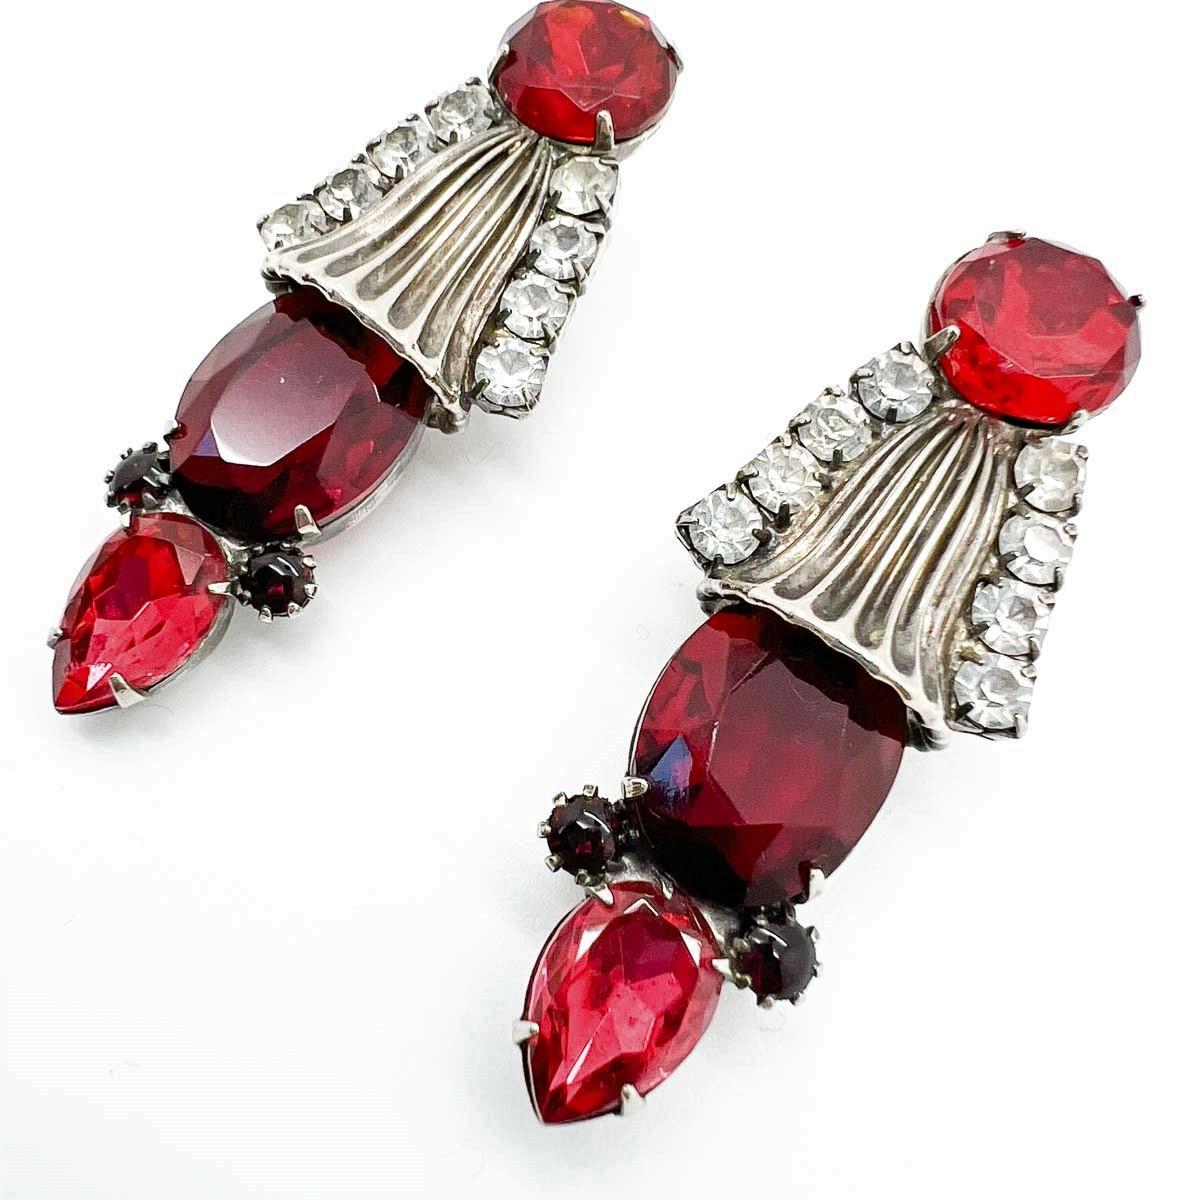 Divine Vintage Ruby Glass Earrings. A clever and elaborate design incorporates large ruby glass stones amongst stylised metal motifs. Attention to detail makes these a truly wearable work of art. A stunning find that will never fail to captivate.
An